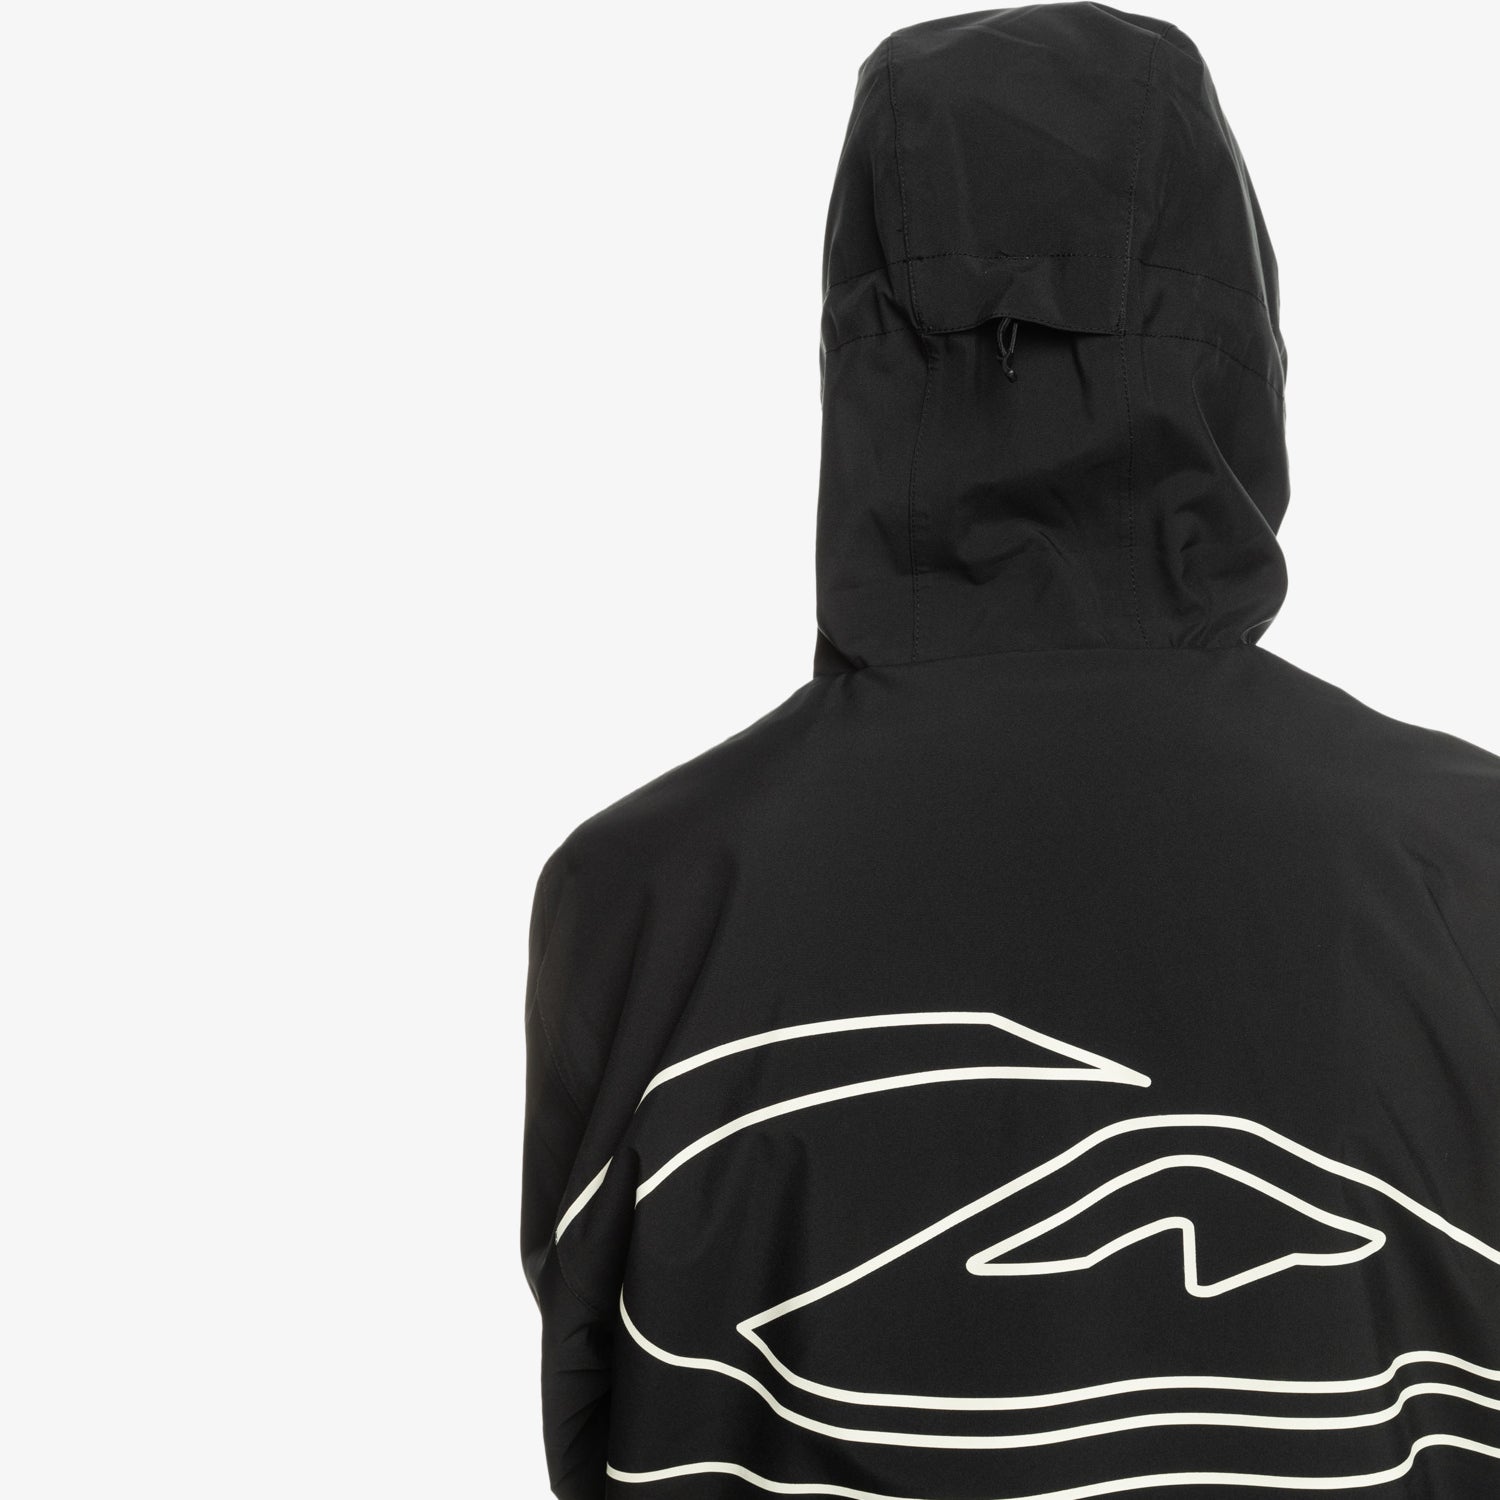 Campera Quiksilver Snow High In The Hood Negro - Indy